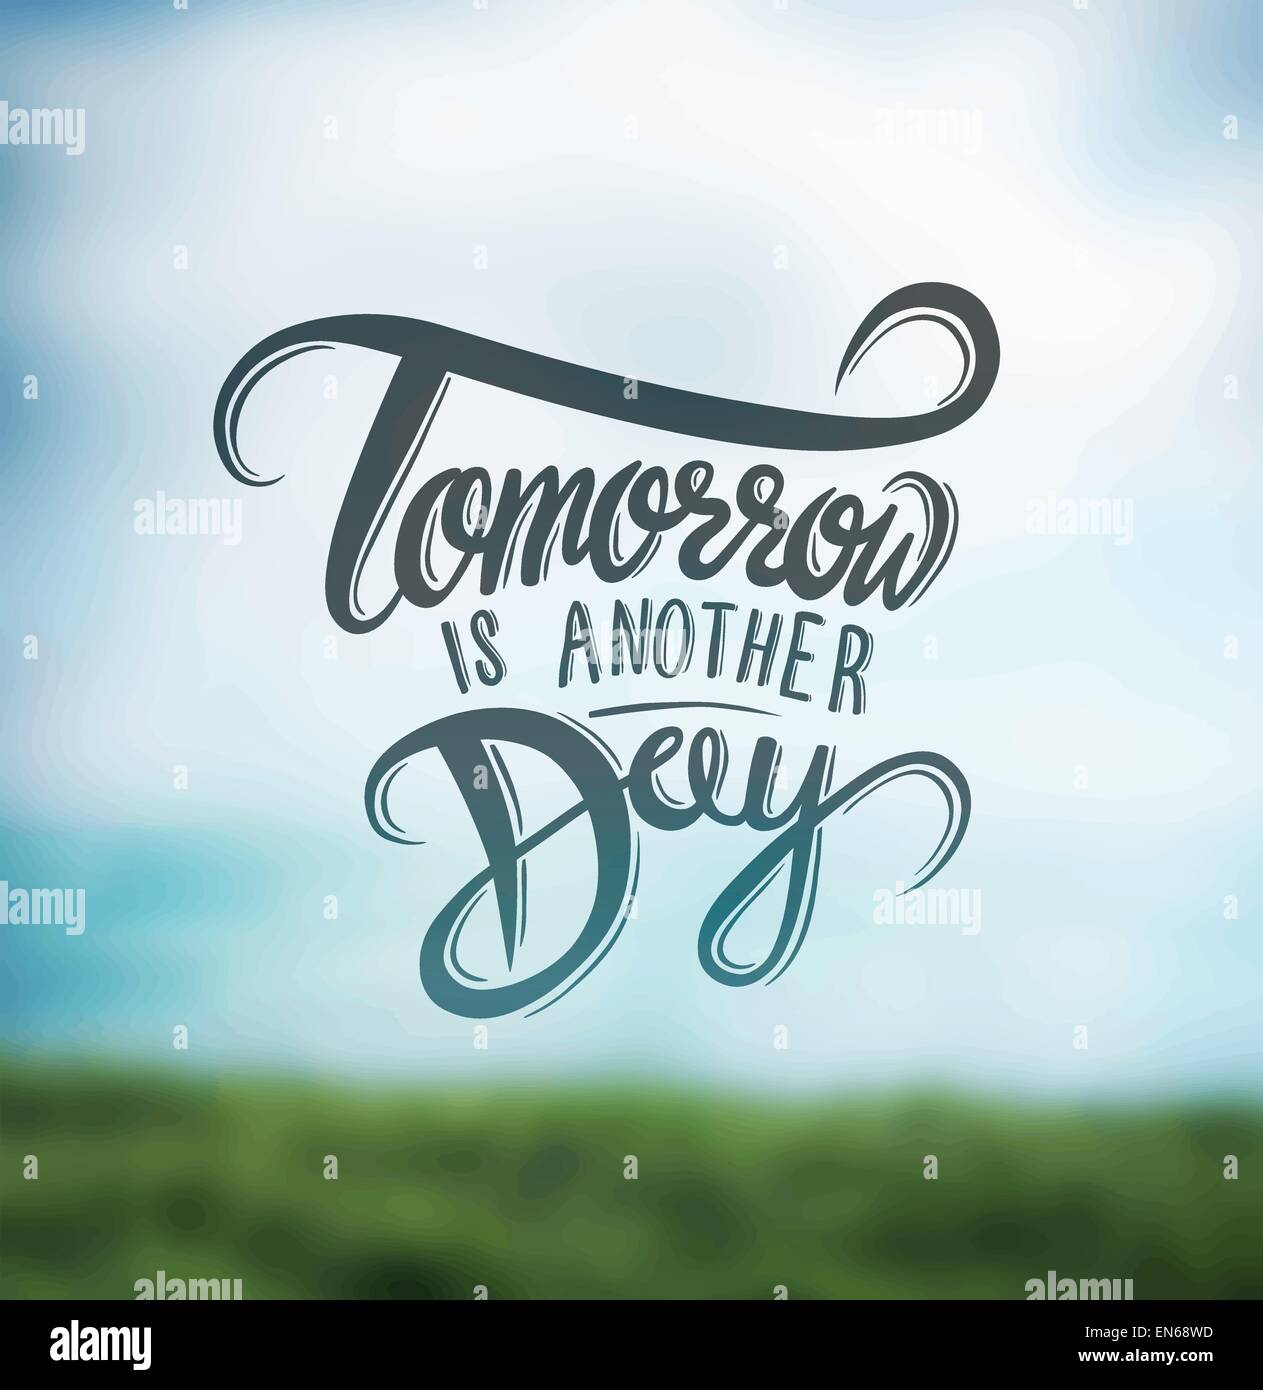 Tomorrow Is Another Day Fotos E Imagenes De Stock Alamy